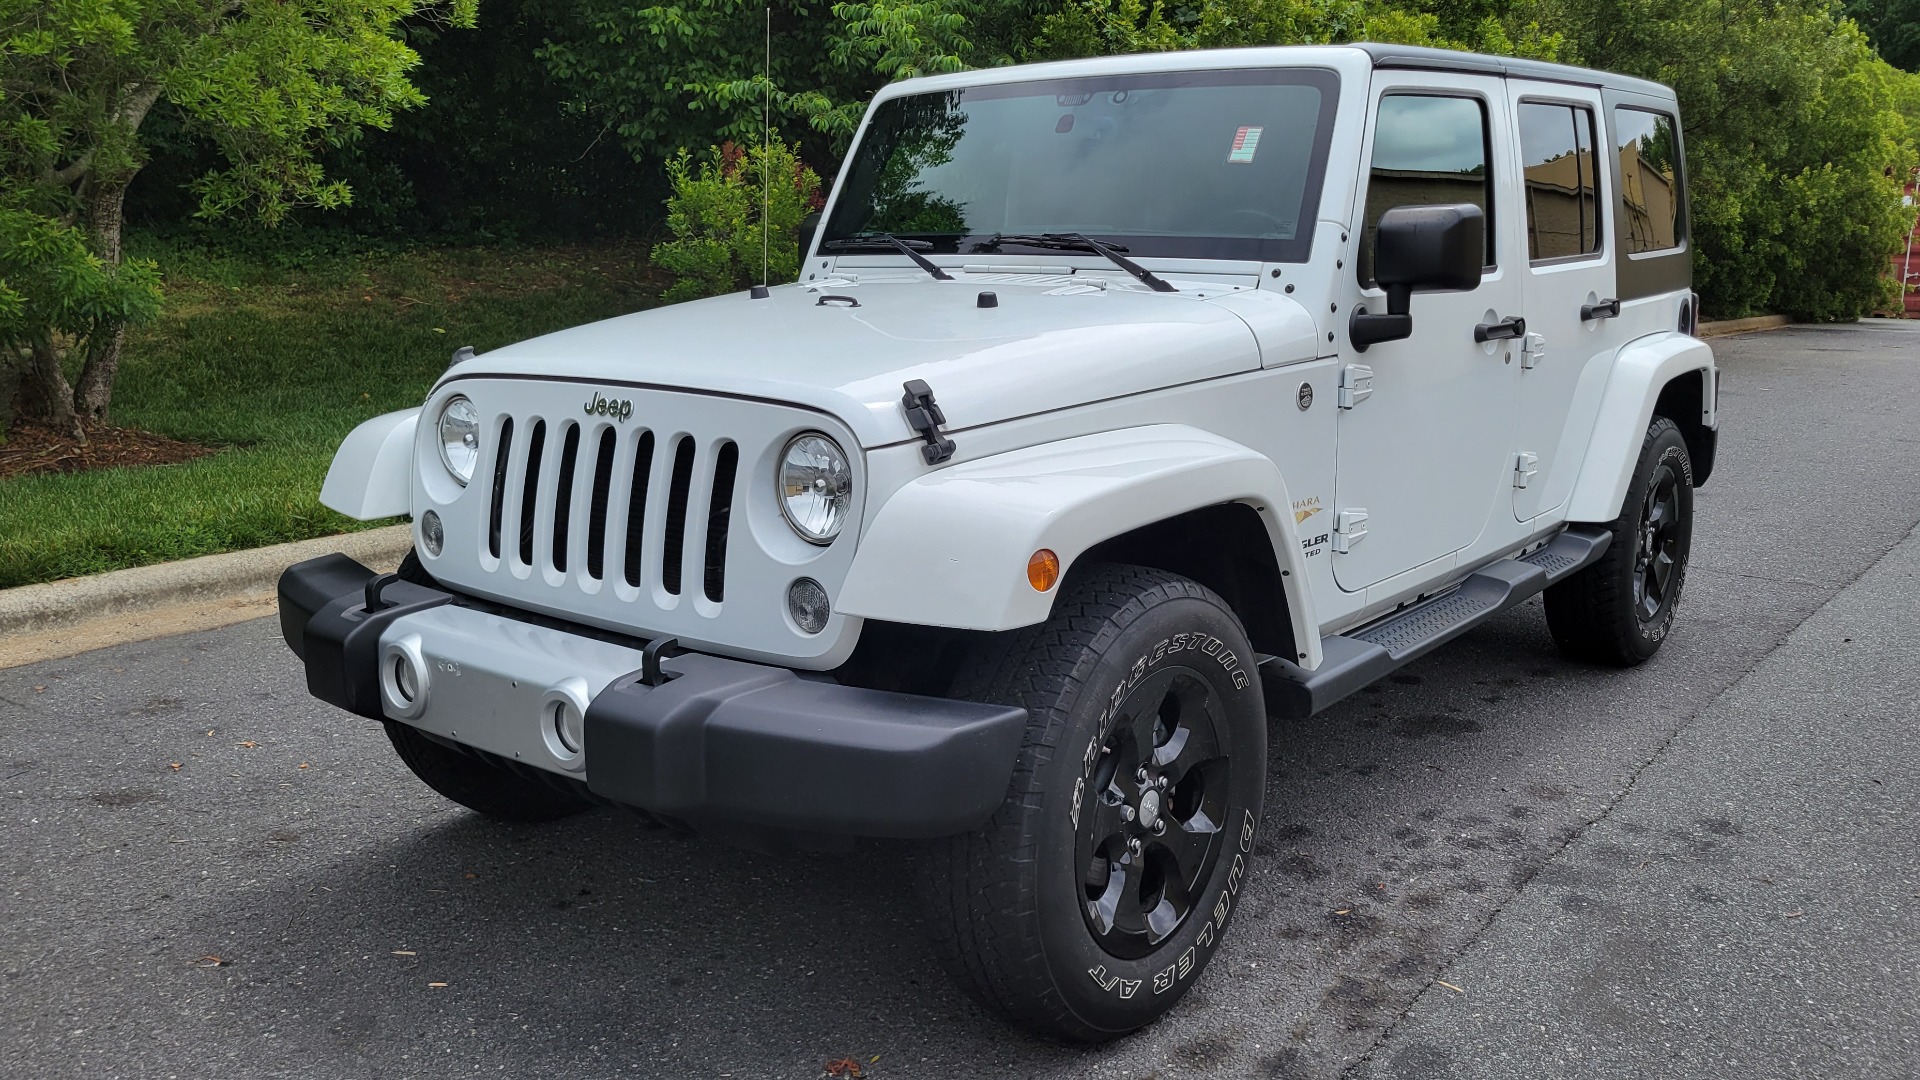 Used 2015 Jeep WRANGLER UNLIMITED SAHARA 4X4 / 3.6L / AUTO / 3-PC HARD-TOP / NAVIGATION for sale $33,295 at Formula Imports in Charlotte NC 28227 1